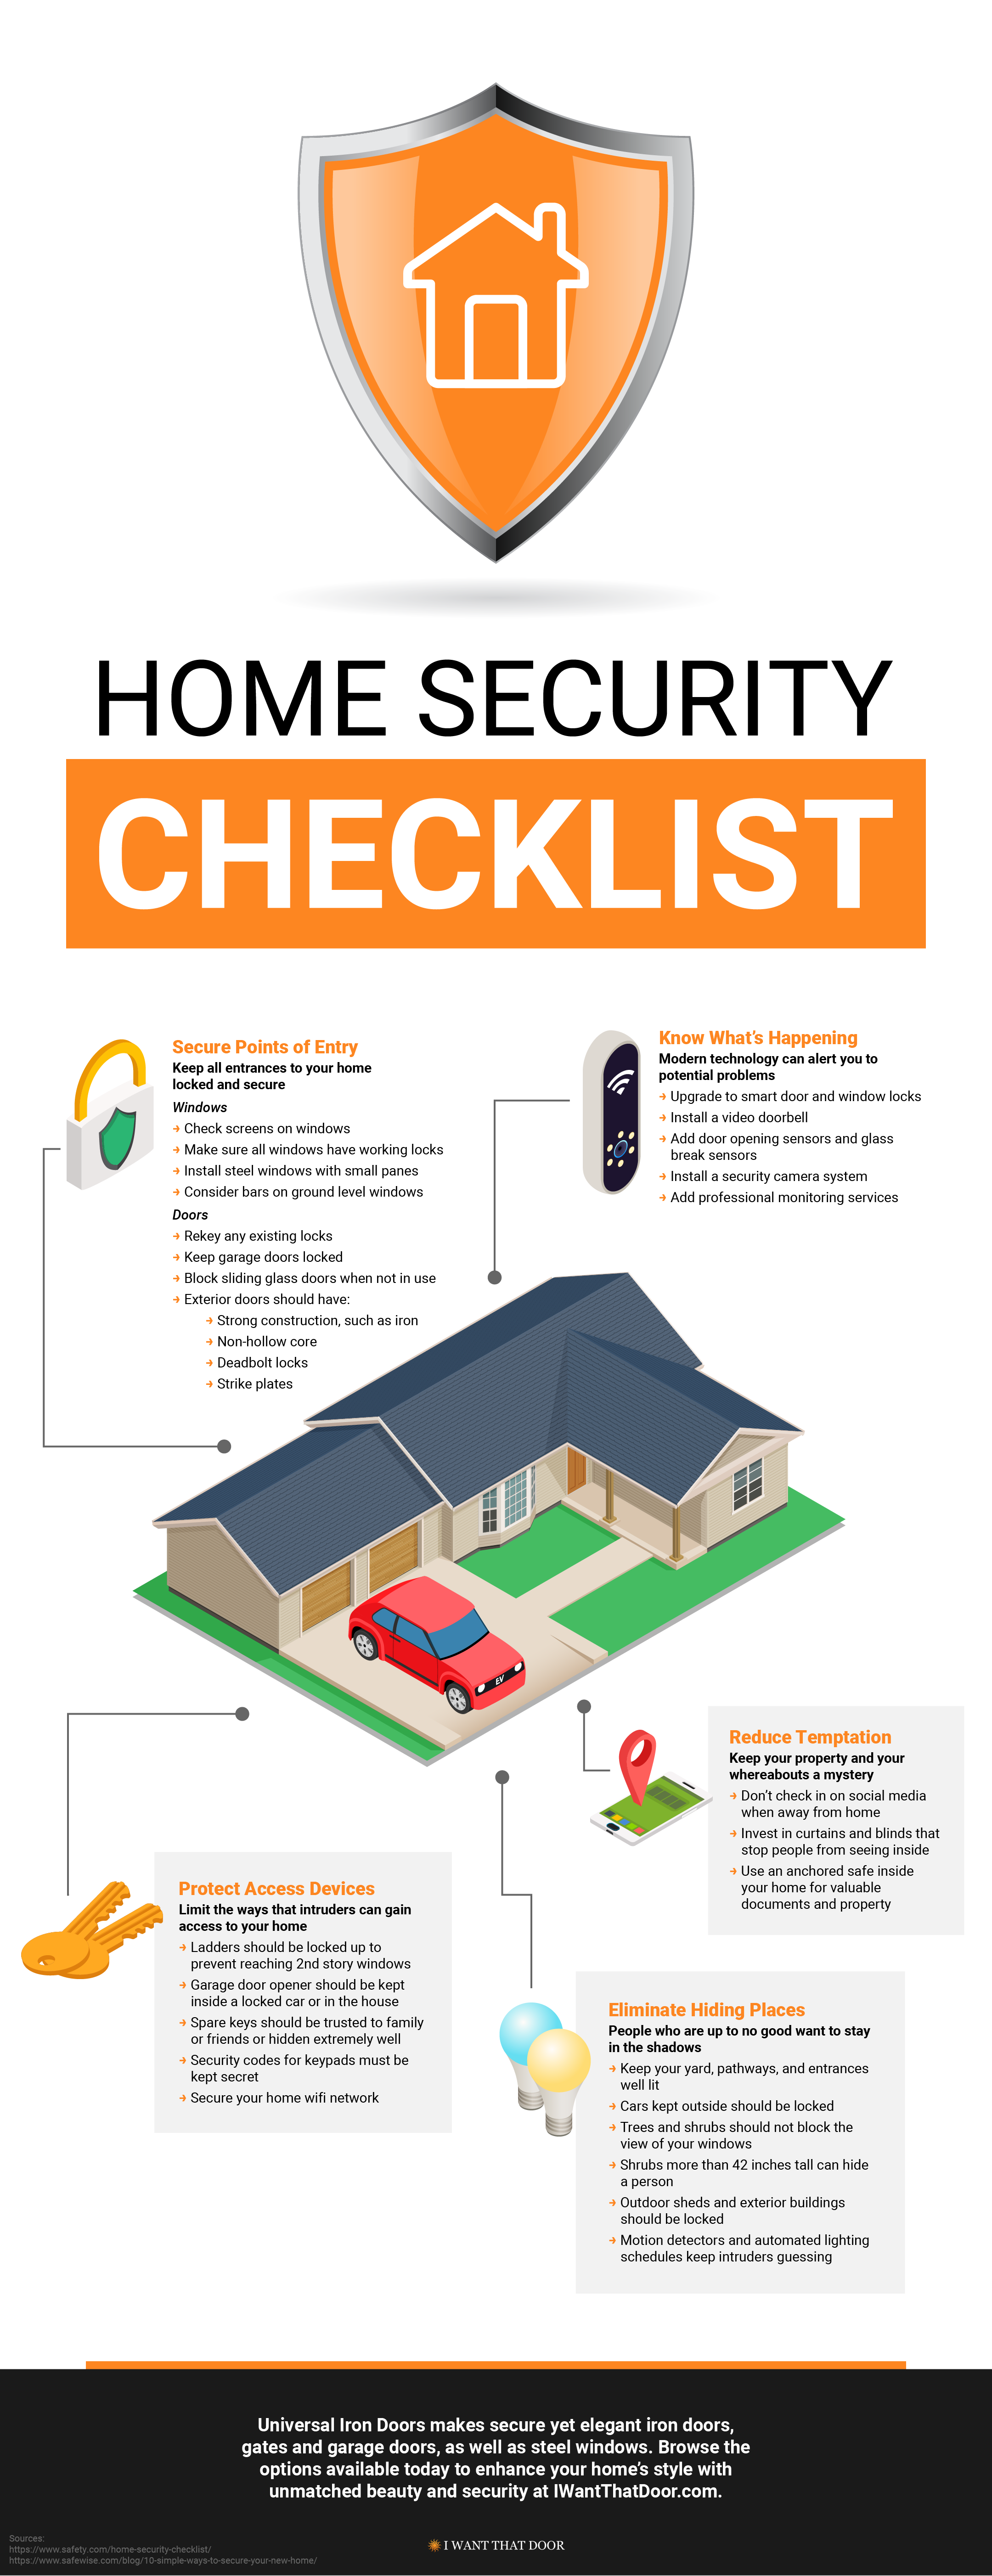 Home Security Checklist Infographic